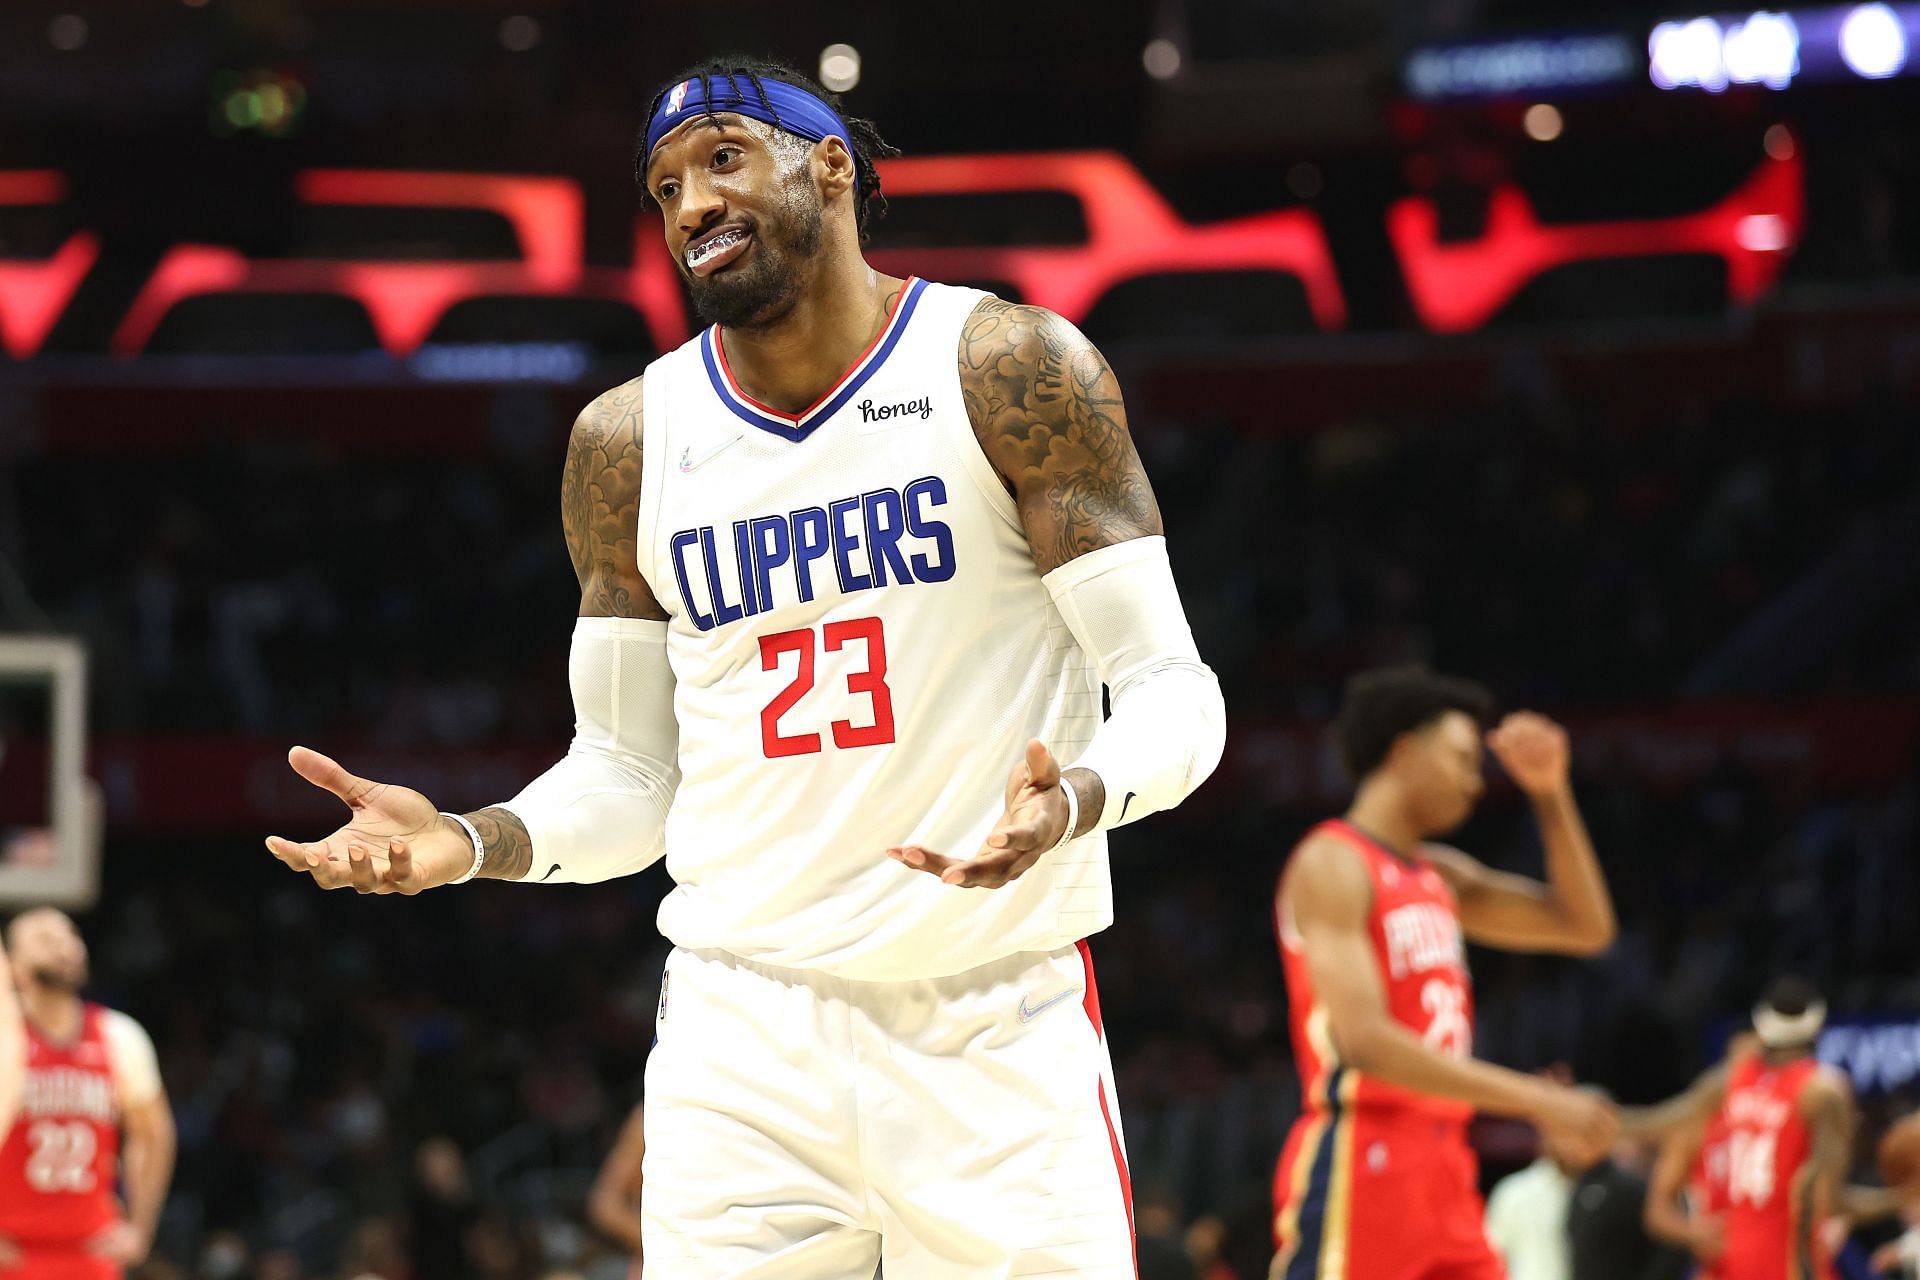 LA Clippers, not Lakers, will be the West Coast team rising from the ashes